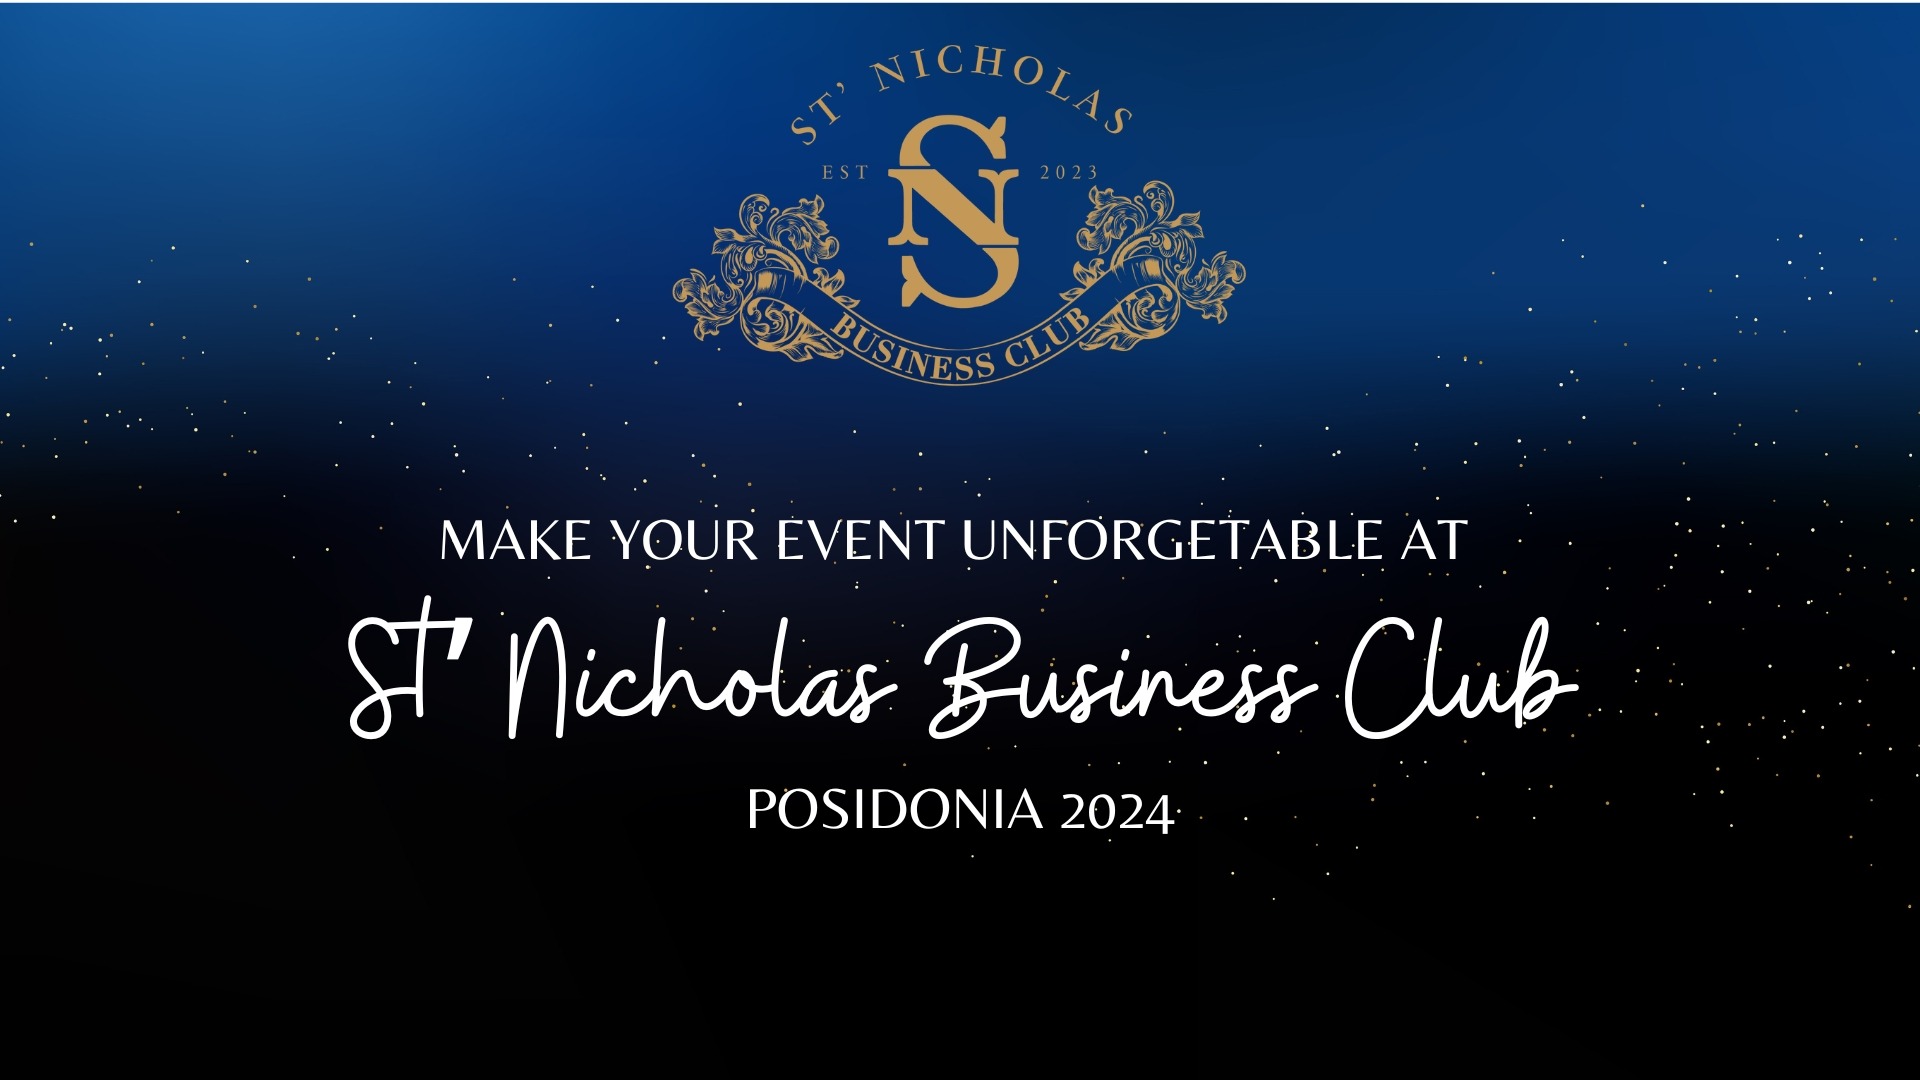 ORGANIZE YOUR EVENT AT ST' NICHOLAS BUSINESS CLUB